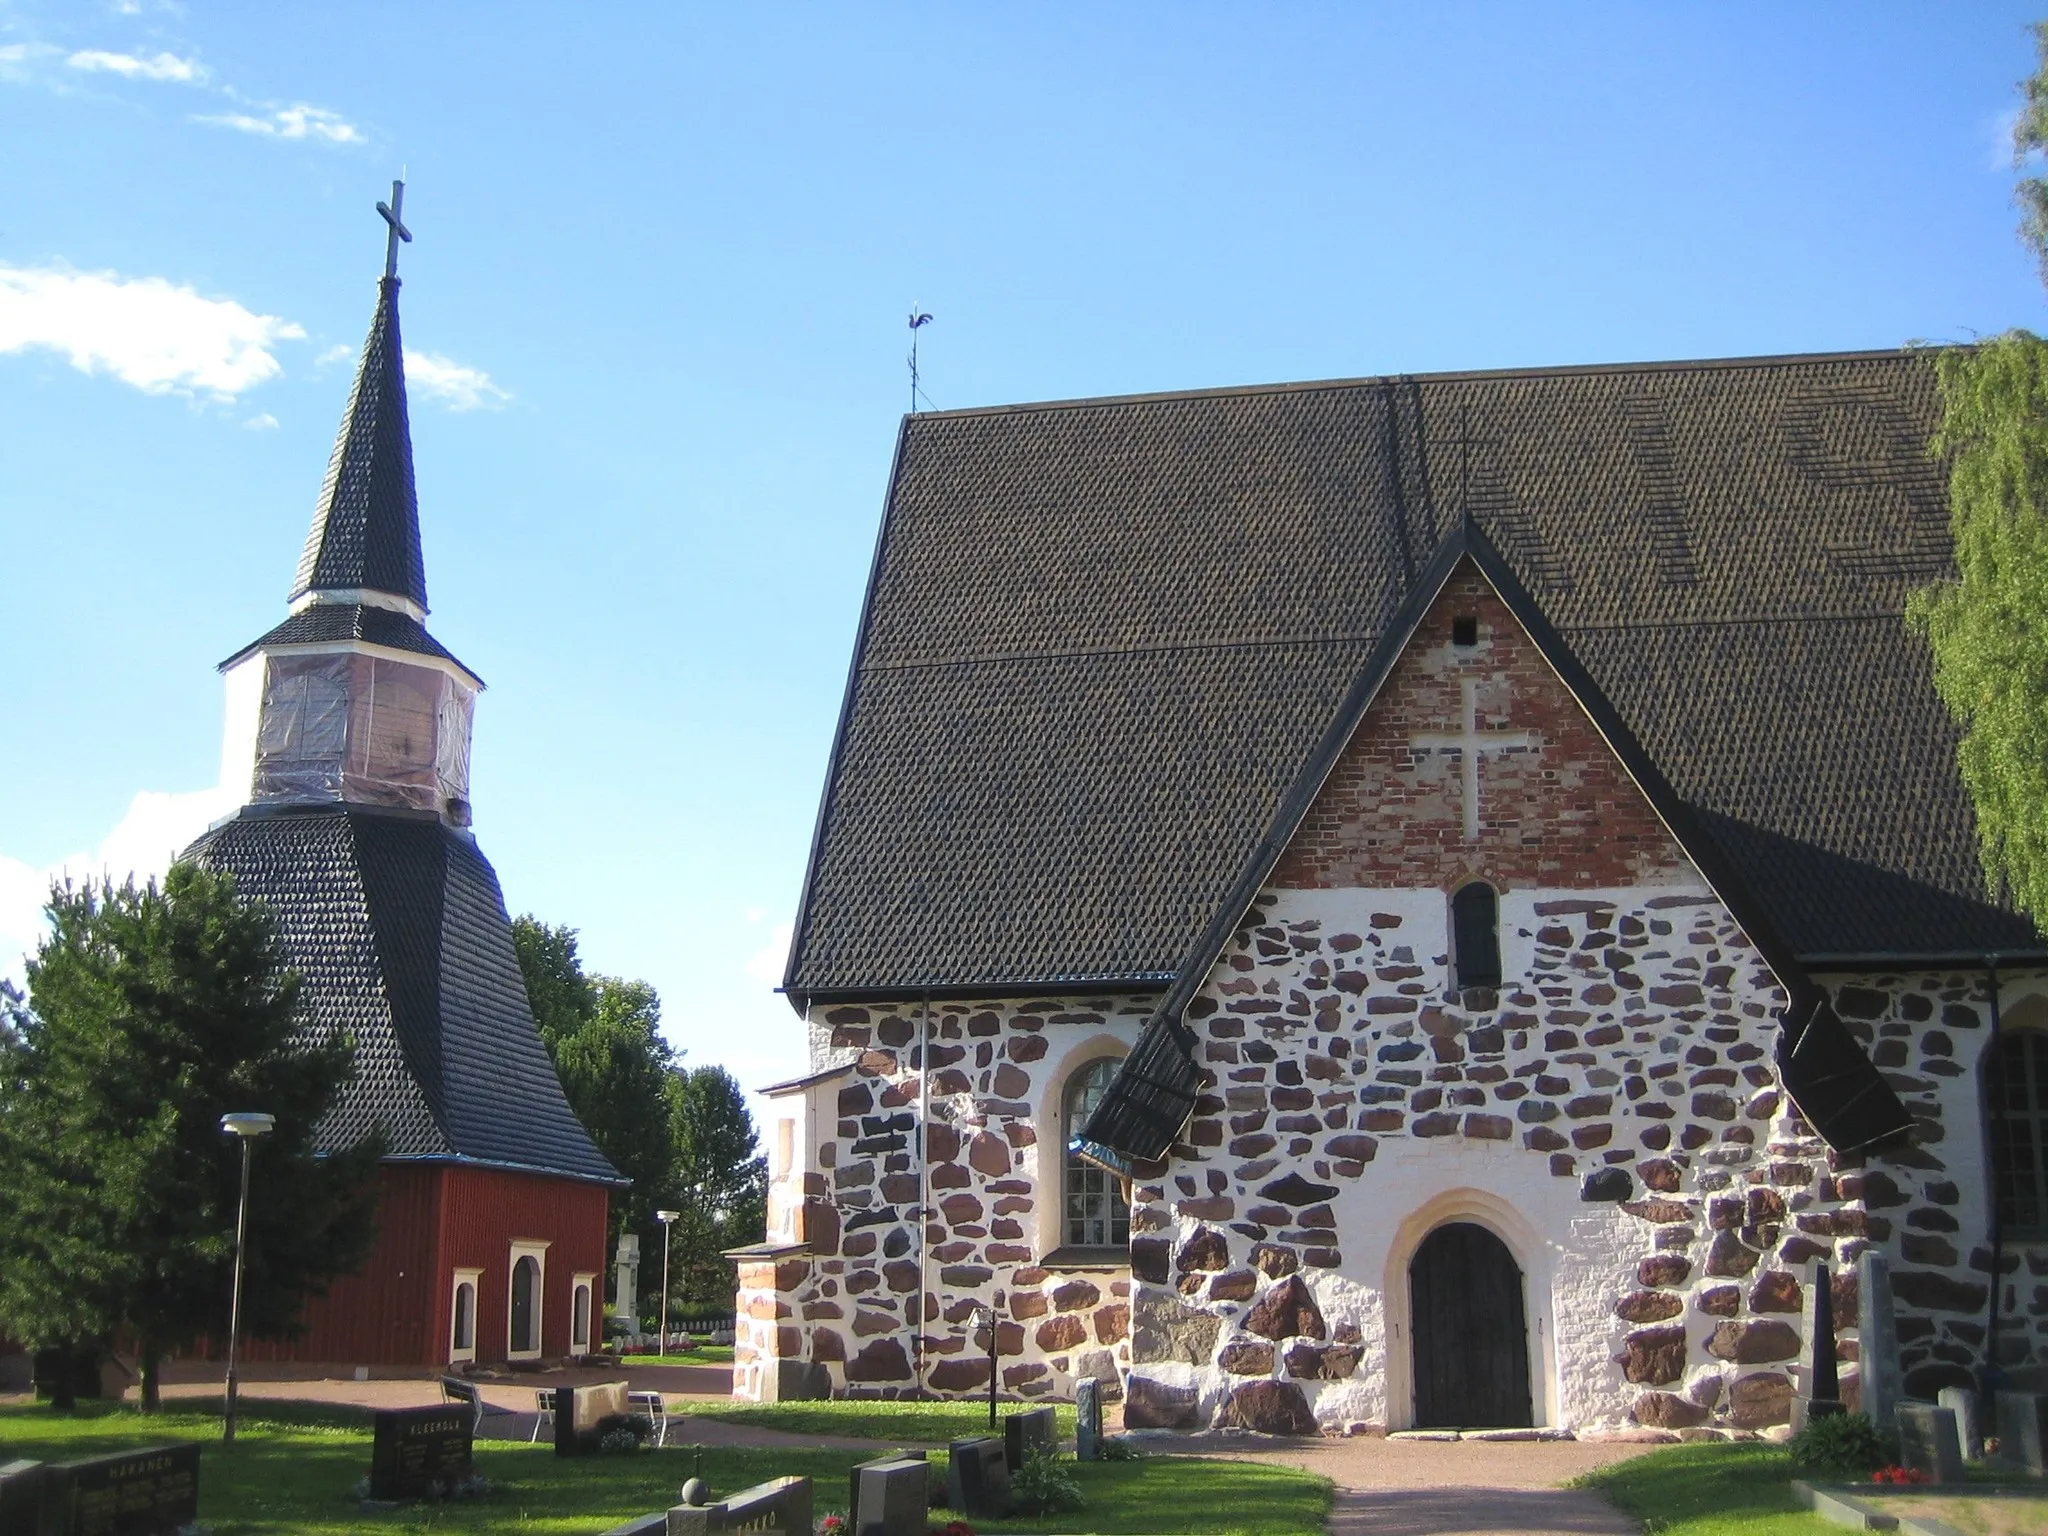 Photo showing: Ulvila Church and Belfry (on the left) in Ulvila, Finland